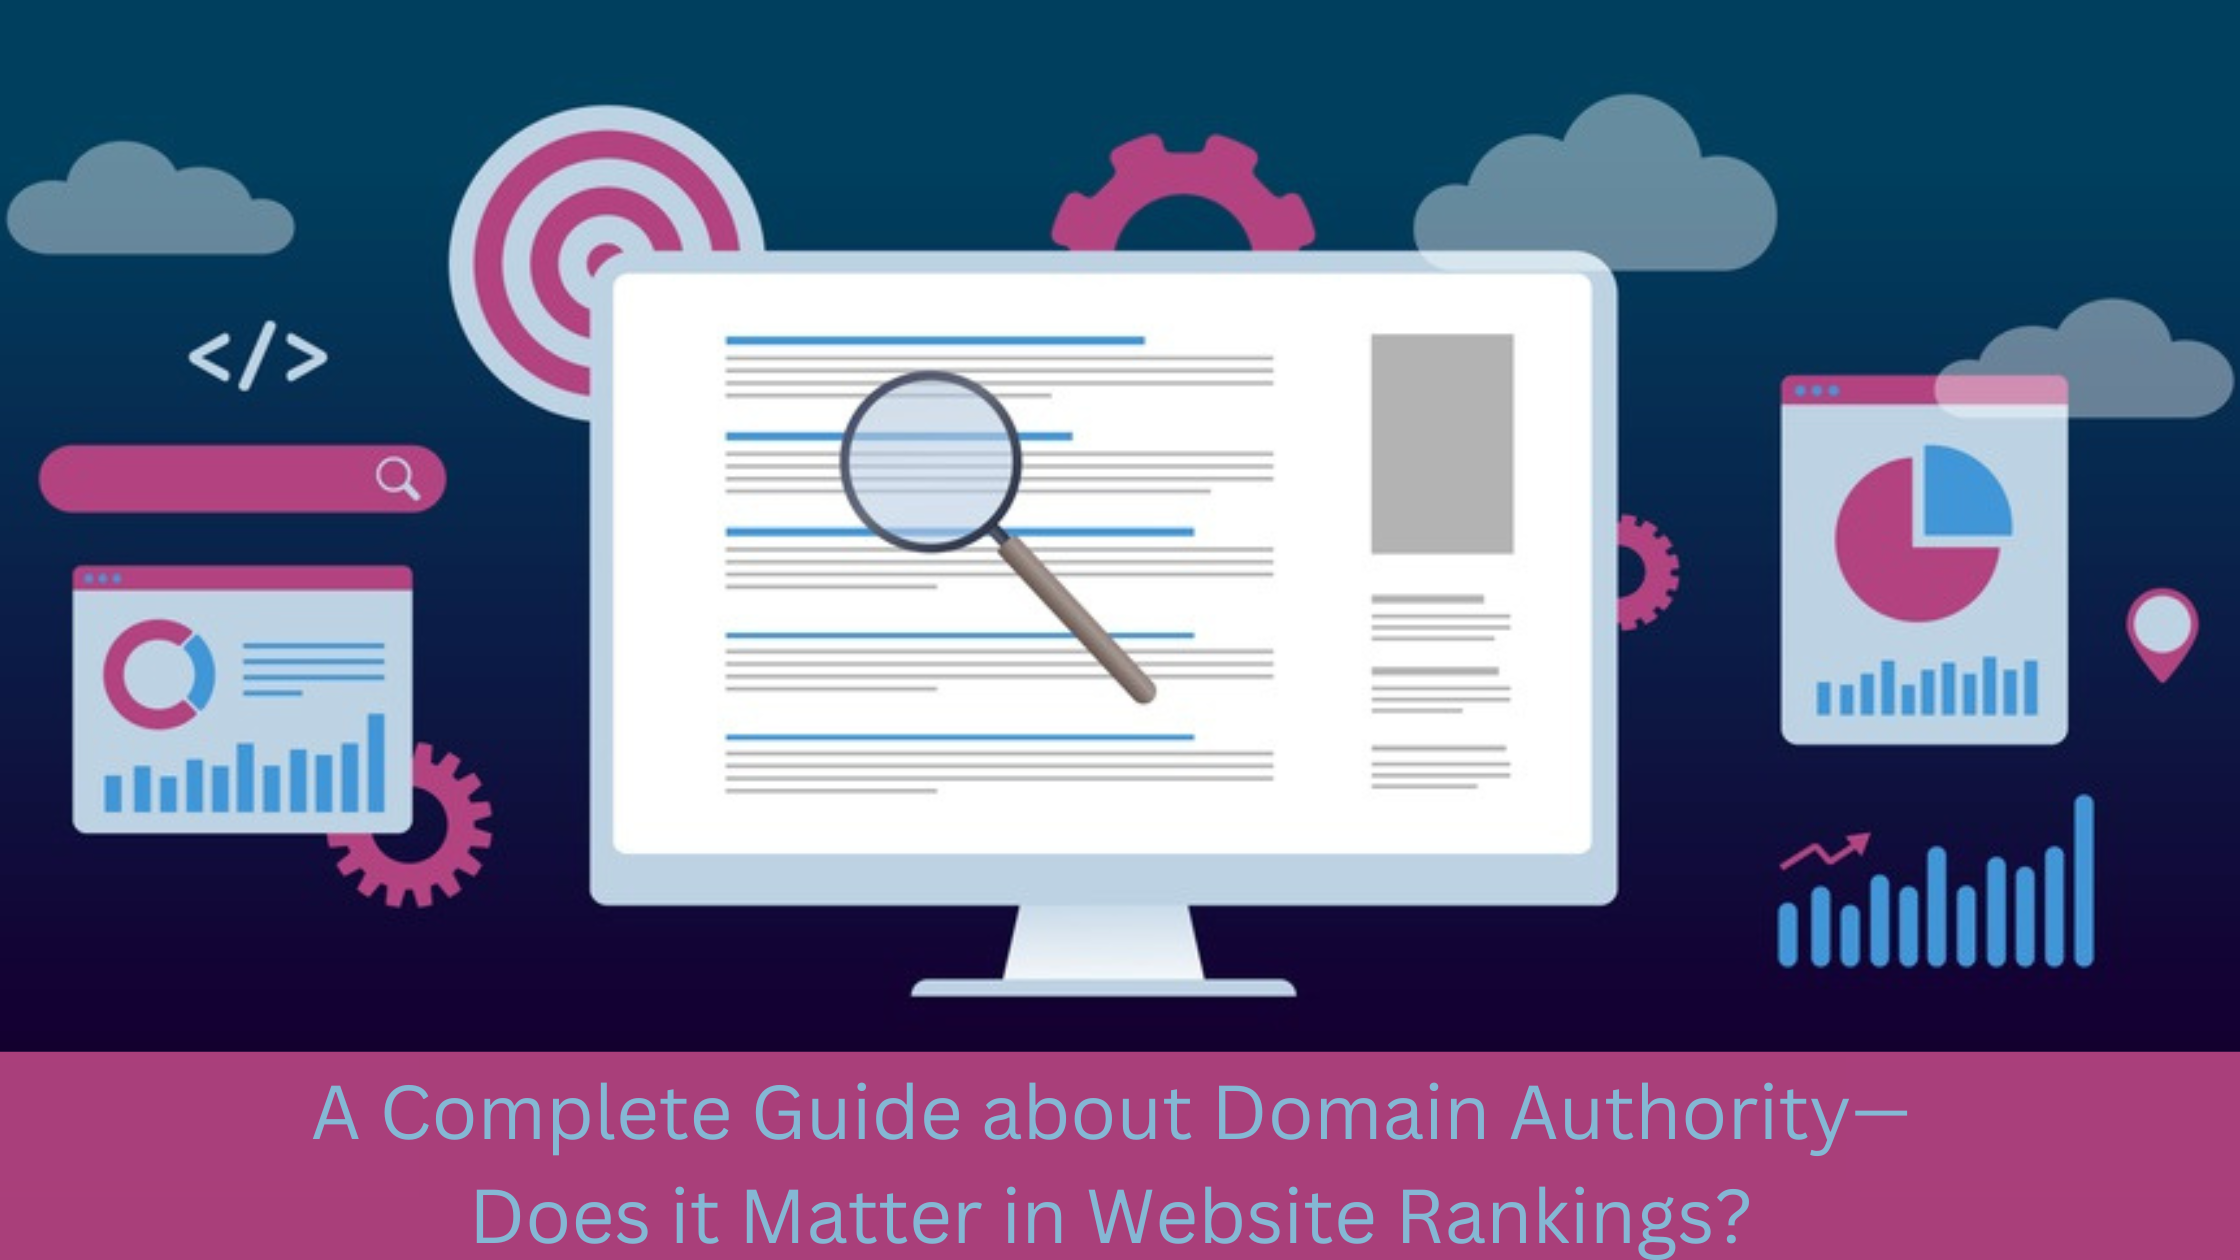 A Complete Guide about Domain Authority—Does it Matter in Website Rankings?